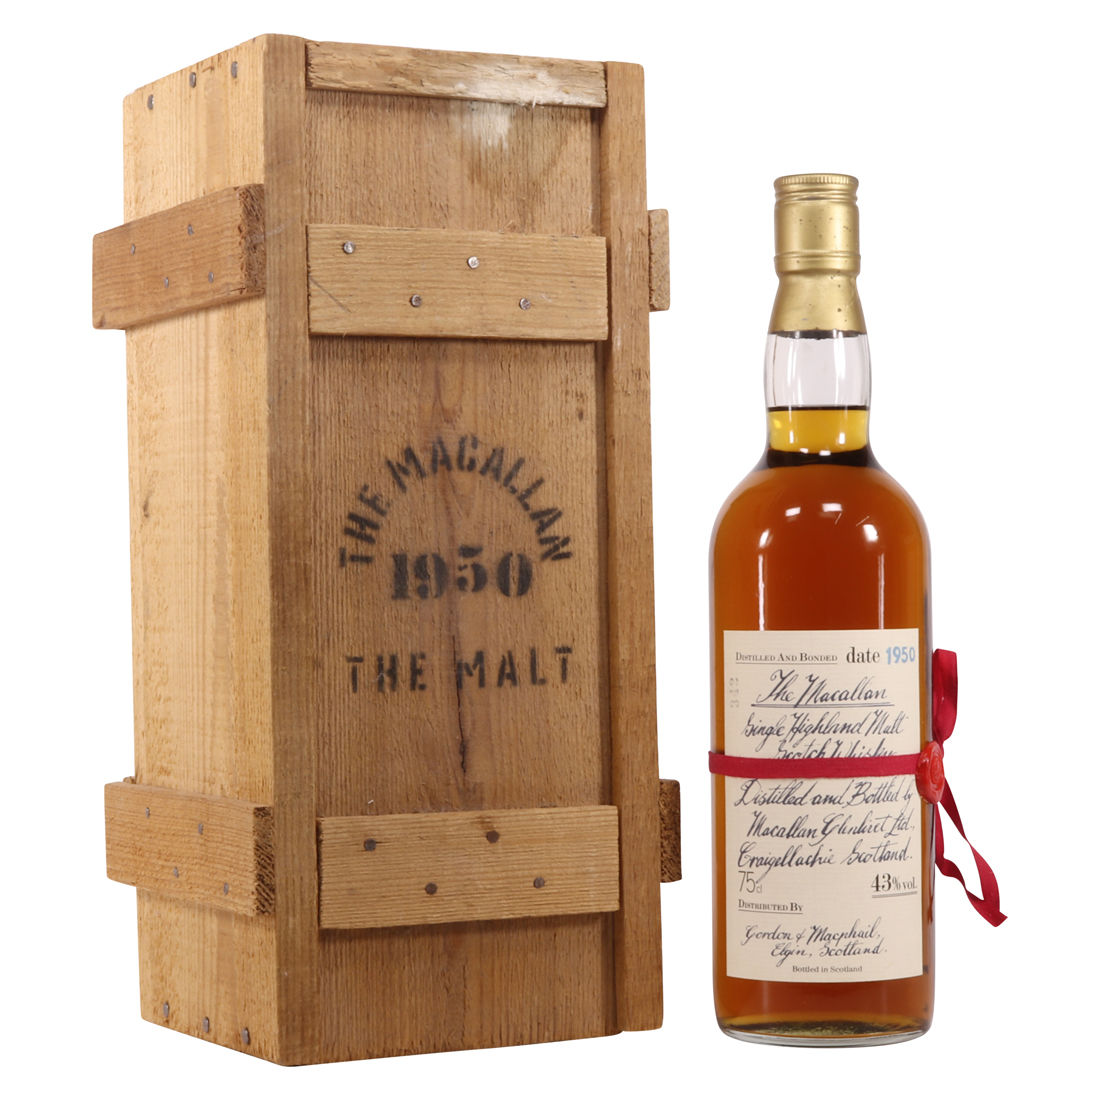 Macallan 1950 Handwritten Label Auction The Grand Whisky Auction